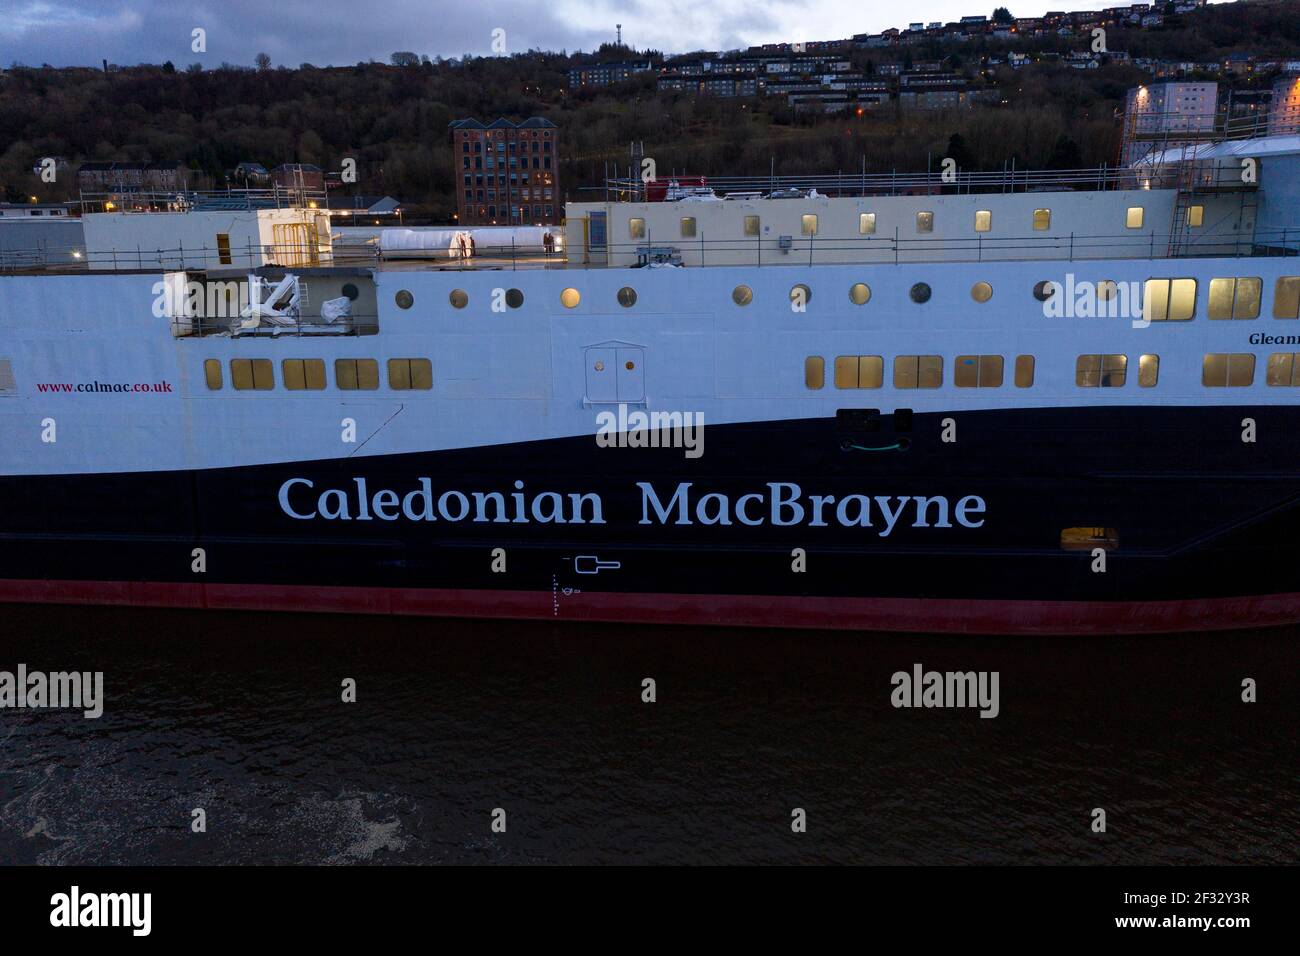 Port Glasgow, Scotland, UK. 14th Mar, 2021. Pictured: Drone photography aerial view of the Caledonian MacBrayne (CalMac) ferry named Glen Sannox, floats in the Firth of Clyde still currently under fabrication. The now Scottish Government owned project is well overdue but expected to be delivered to Caledonian MacBrayne sometime this coming year. COVID19 shutdowns have added an additional cost of £4.3m to the already over-budget ferry costs. Credit: Colin Fisher/Alamy Live News Stock Photo